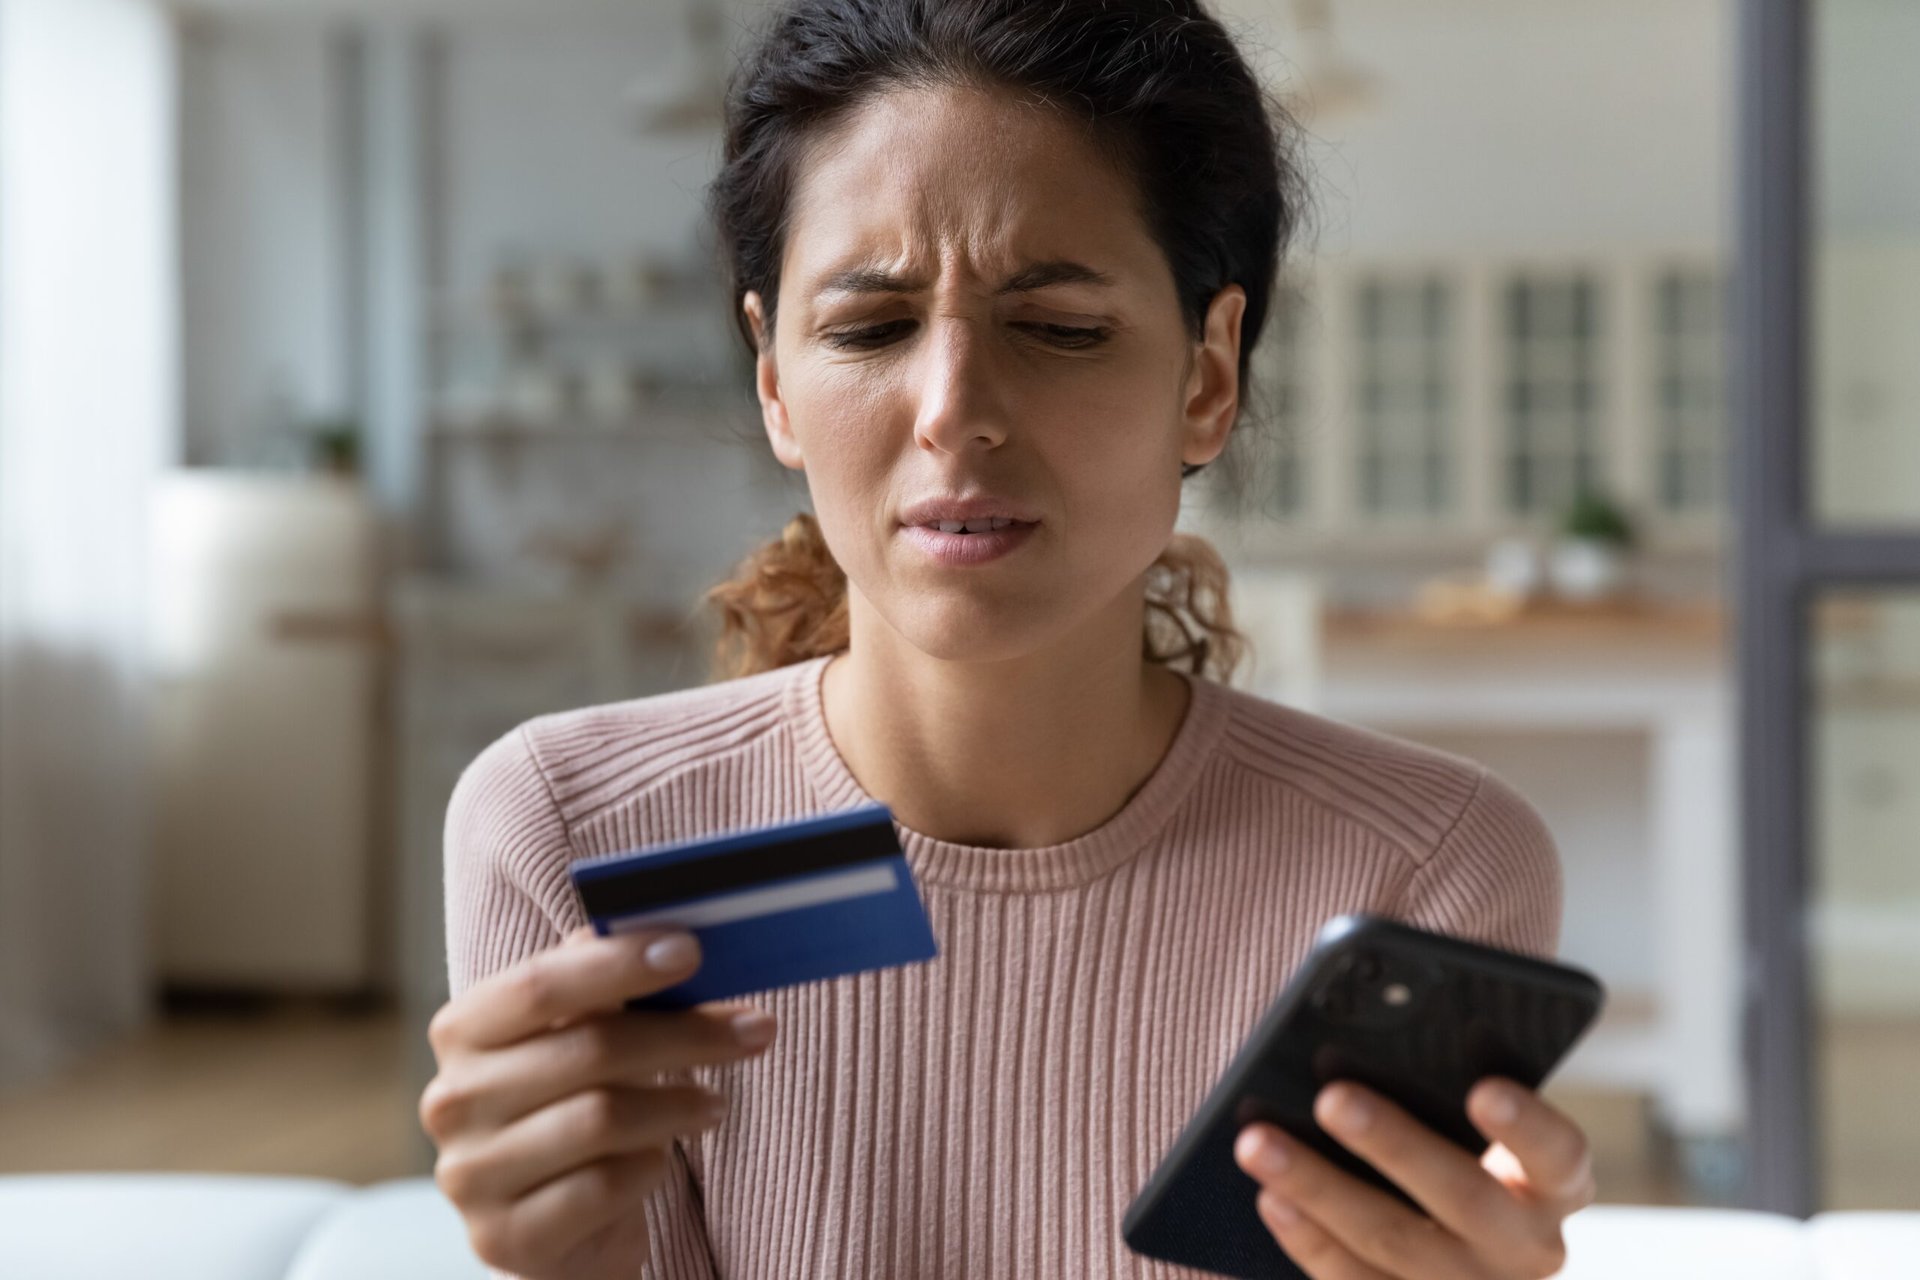 Woman looking at her phone skeptical or sad while holding credit card